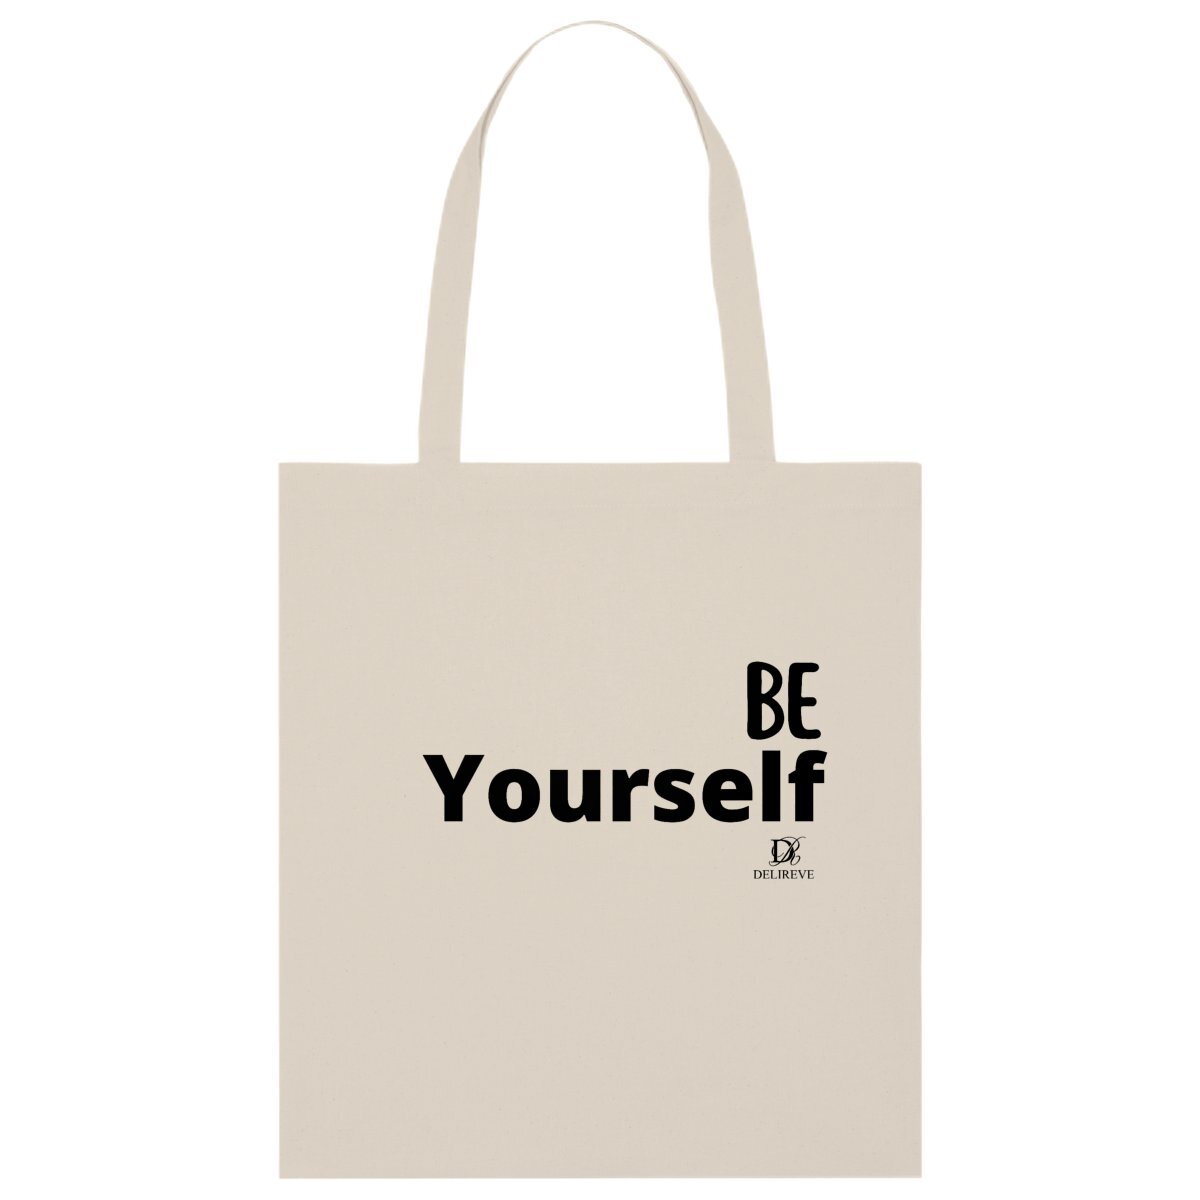 Totebag BE YOURSELF